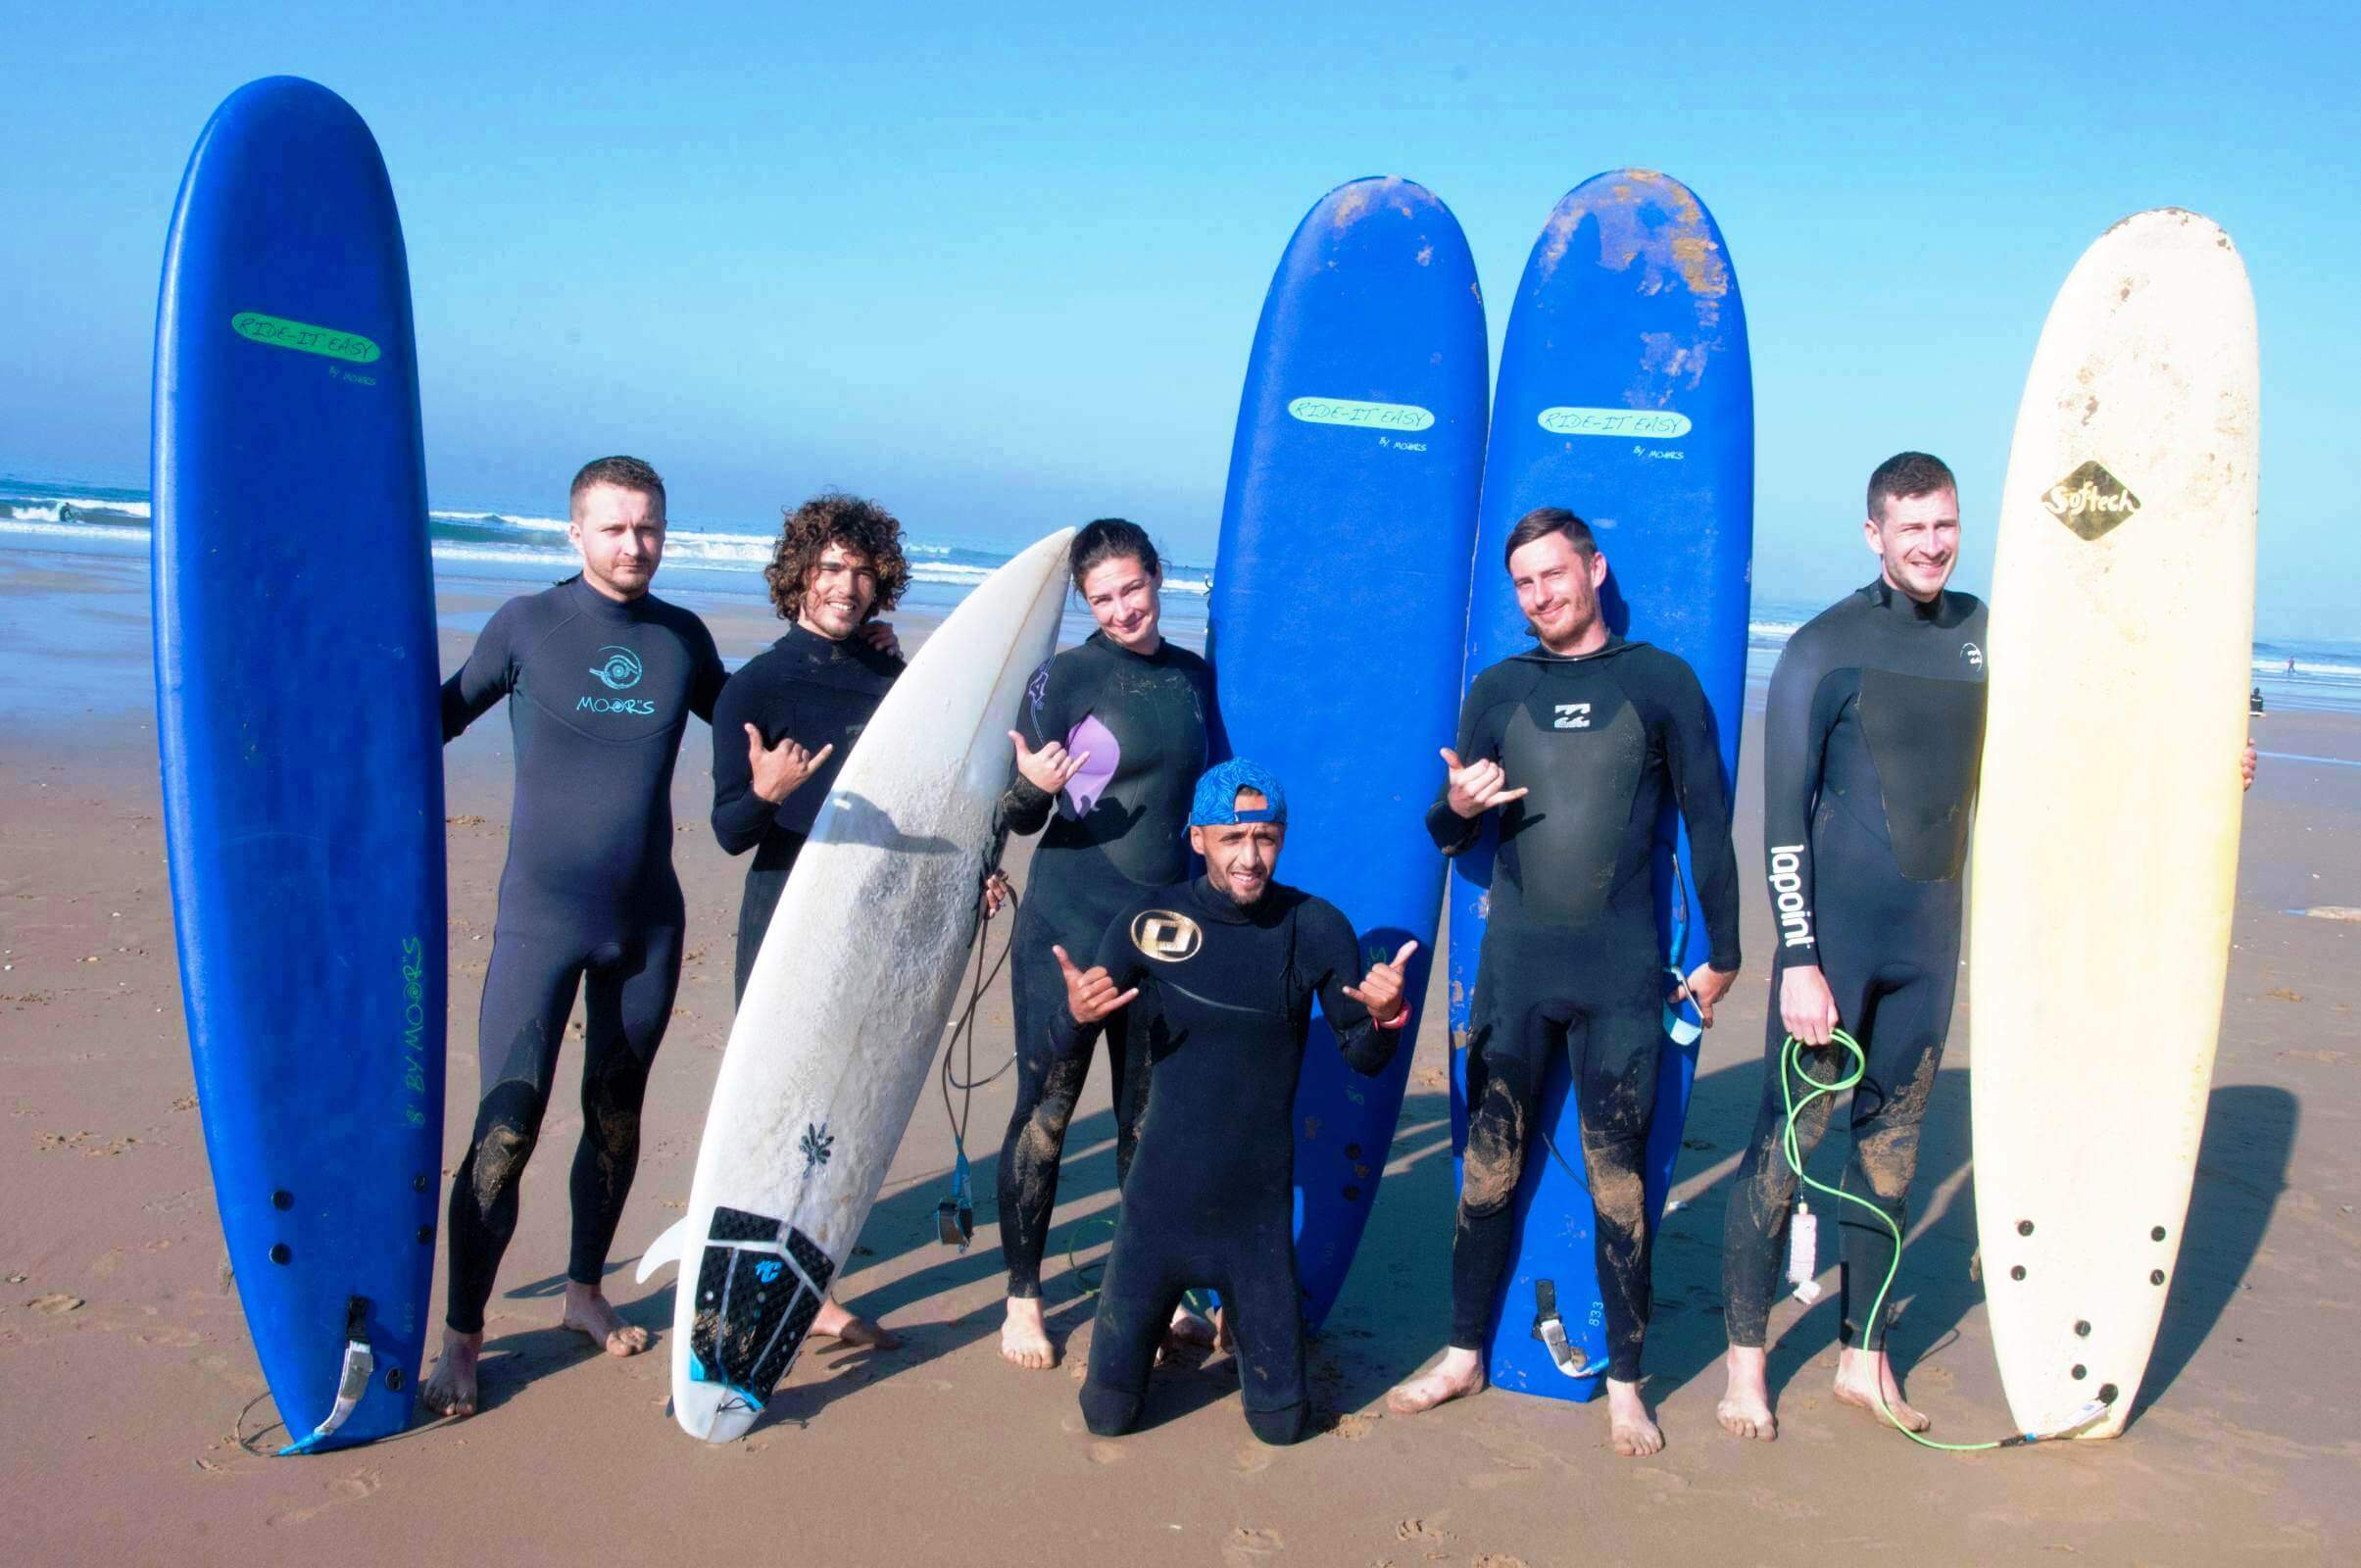 Morocco surfing tours in Agadir beaches to enjoy the waves of Taghazout